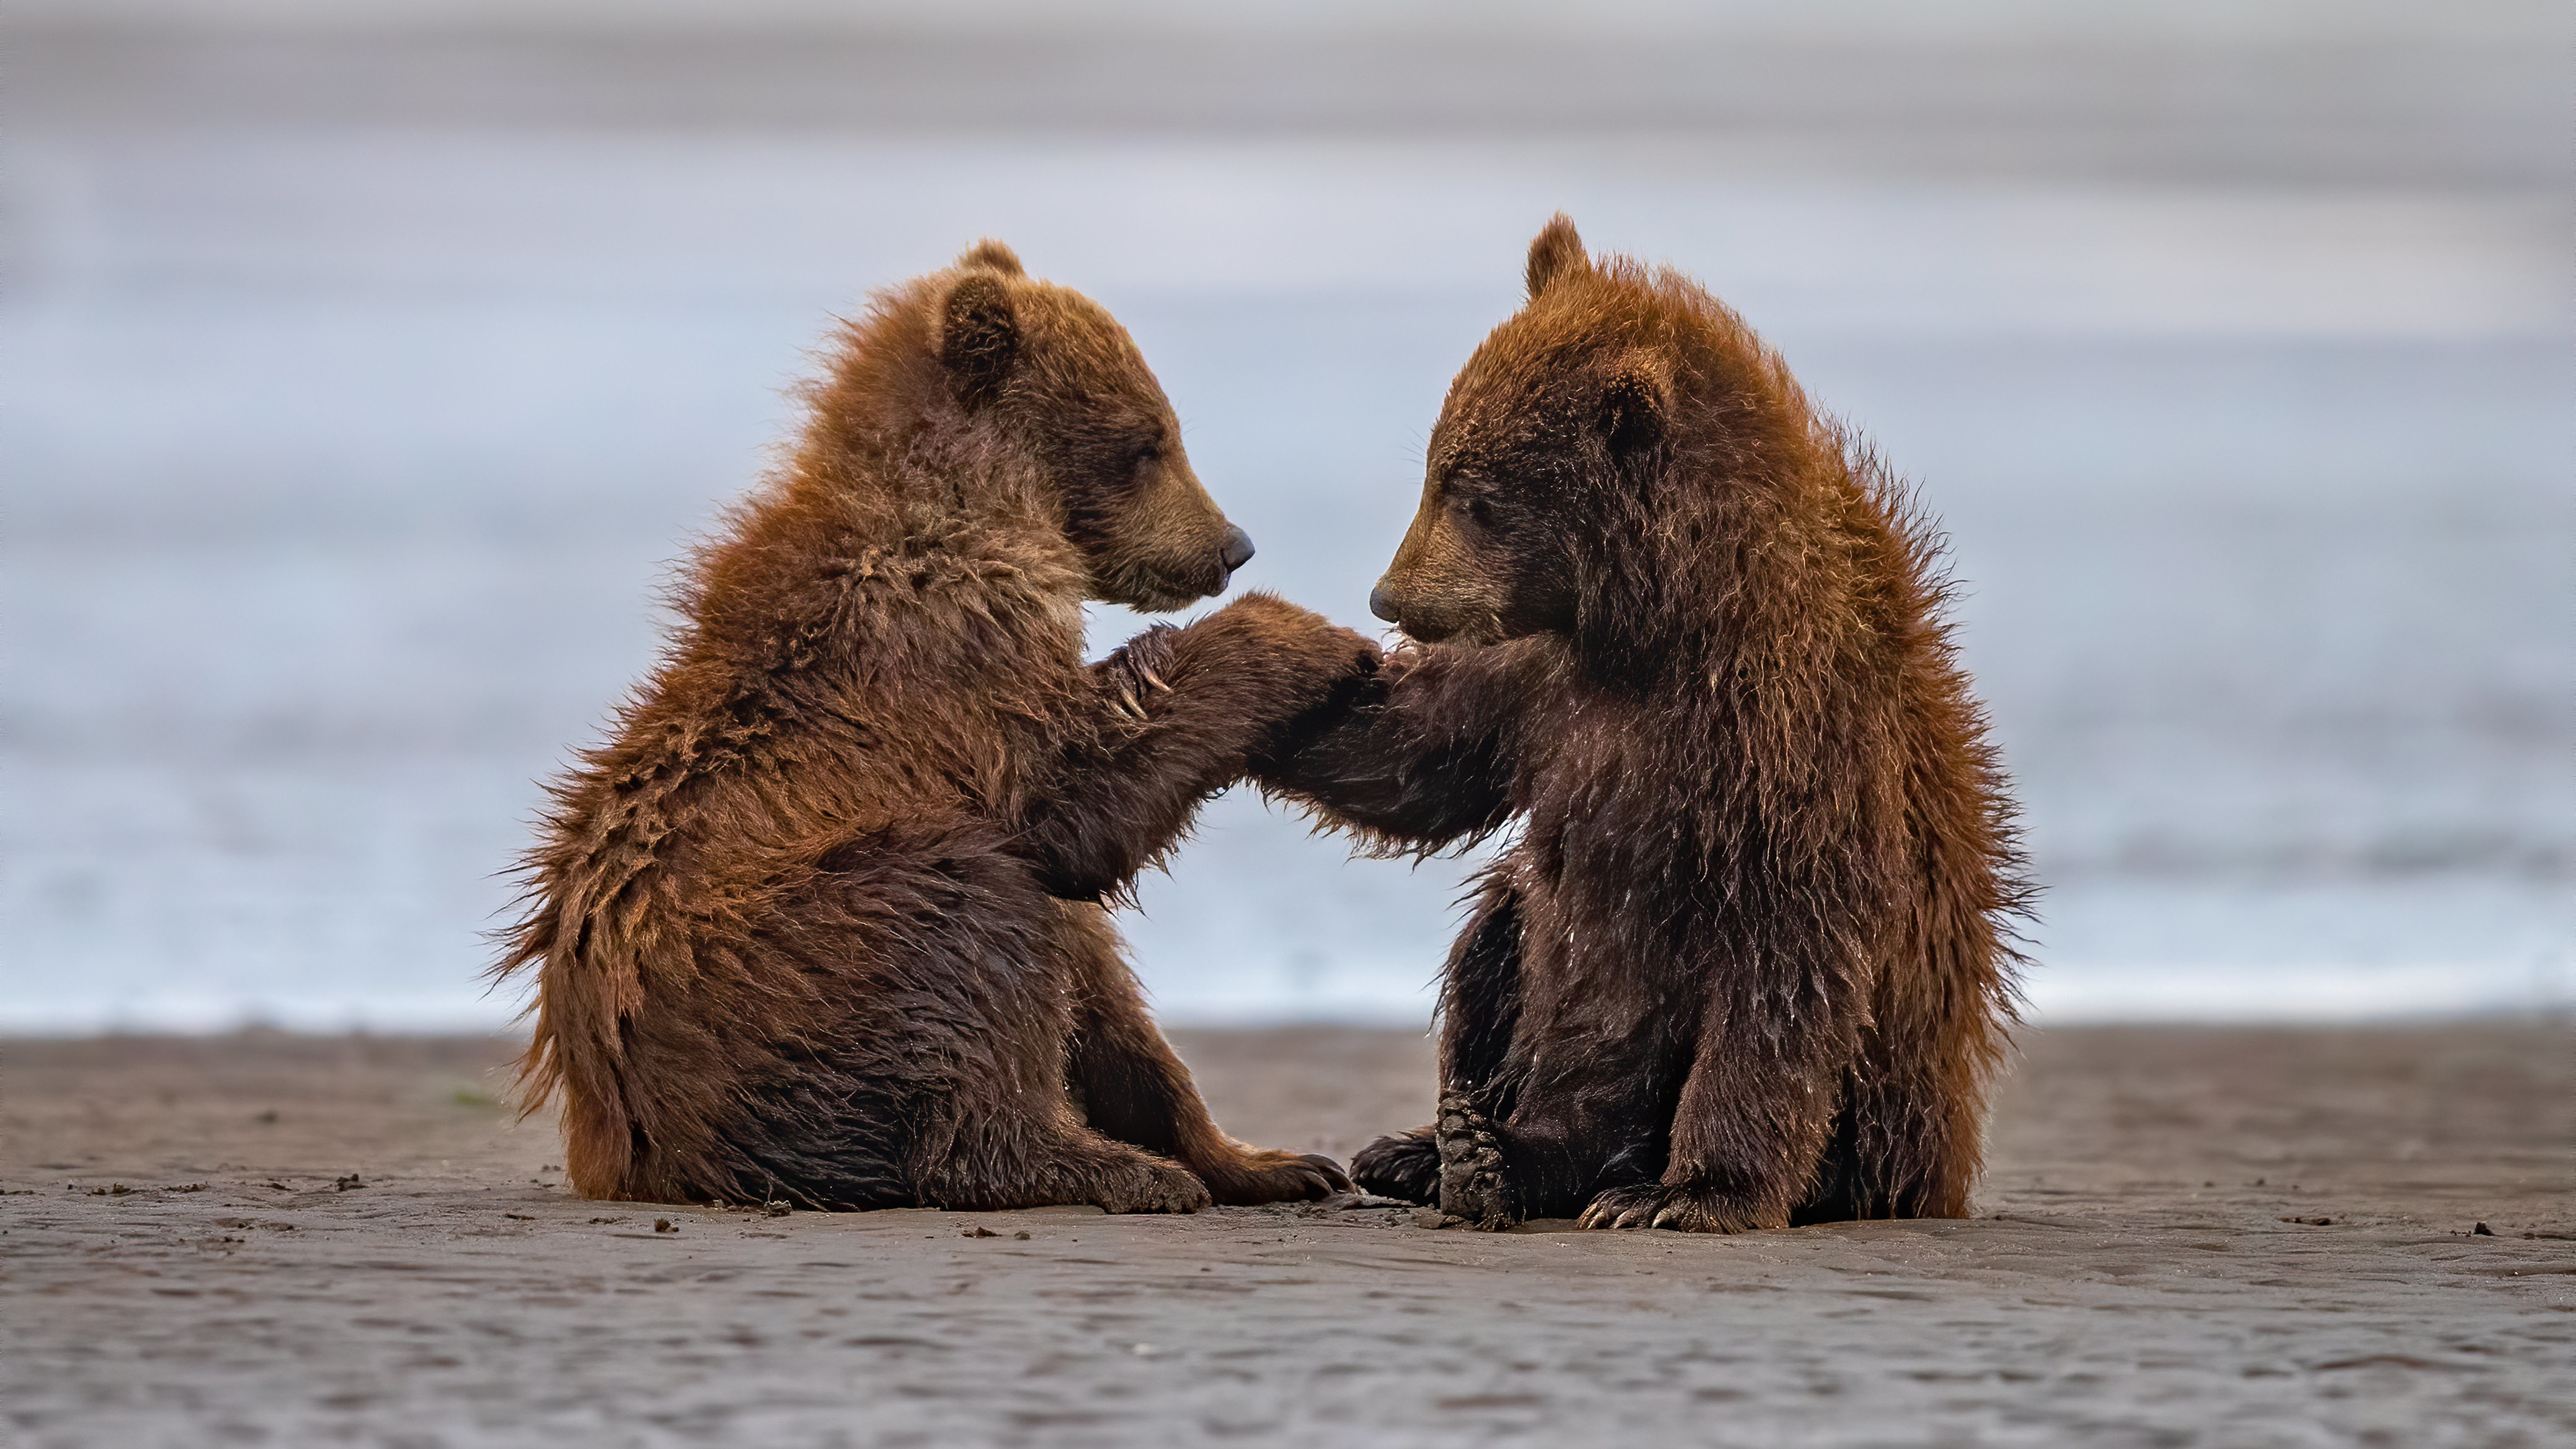 Two Baby Bears Are Sitting On Beach Sand With Water Background During Daytime 4K HD Animals